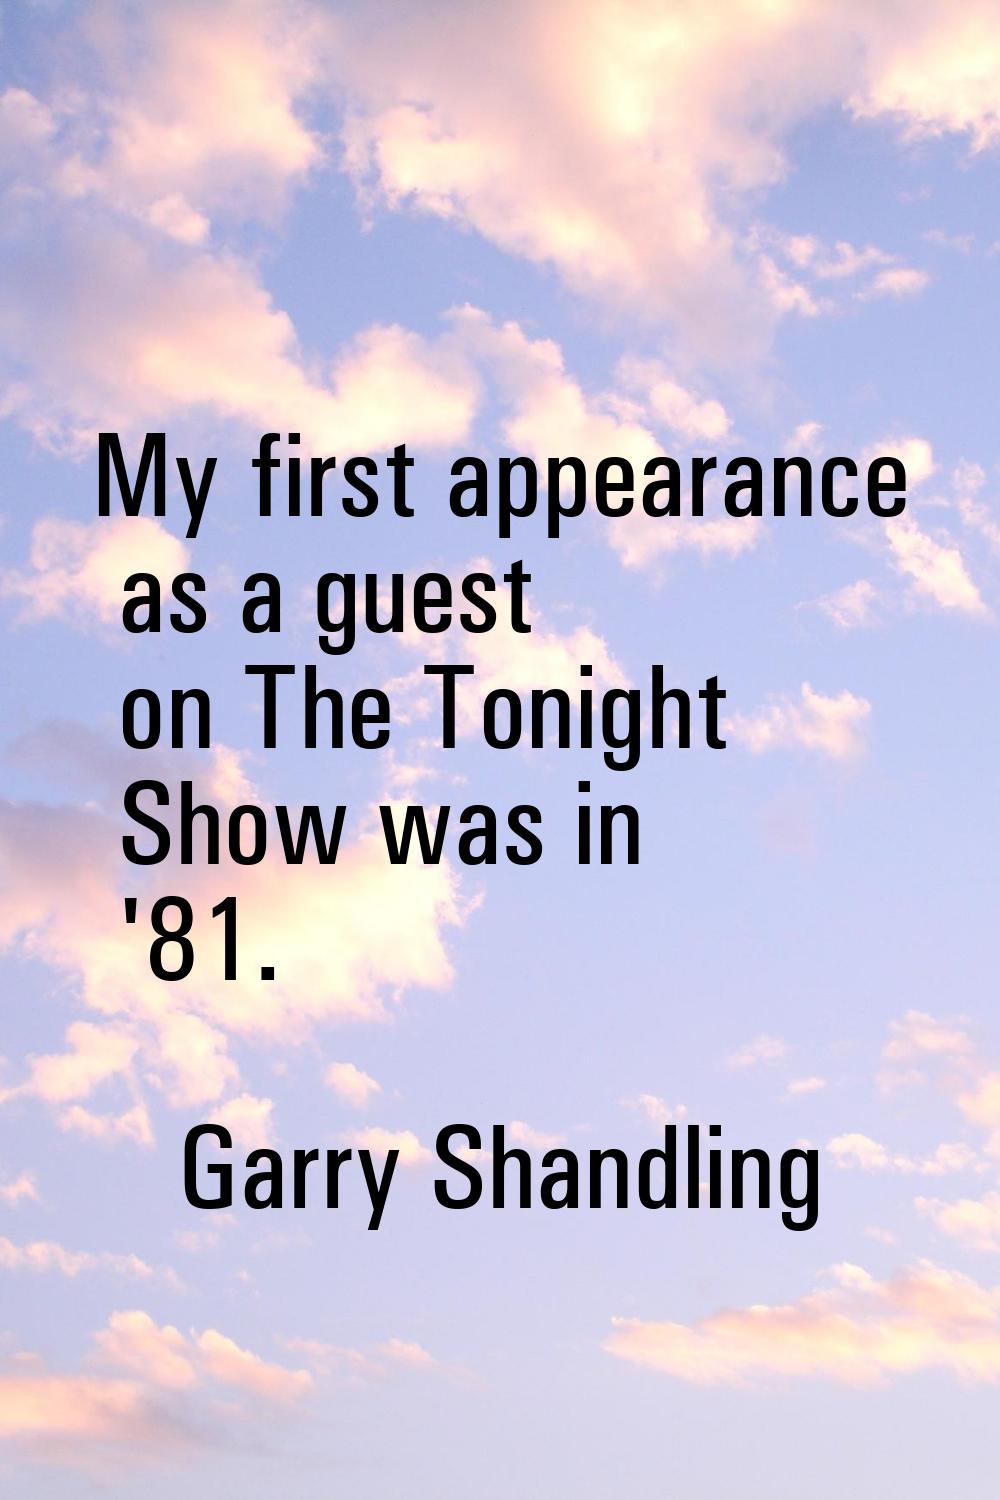 My first appearance as a guest on The Tonight Show was in '81.